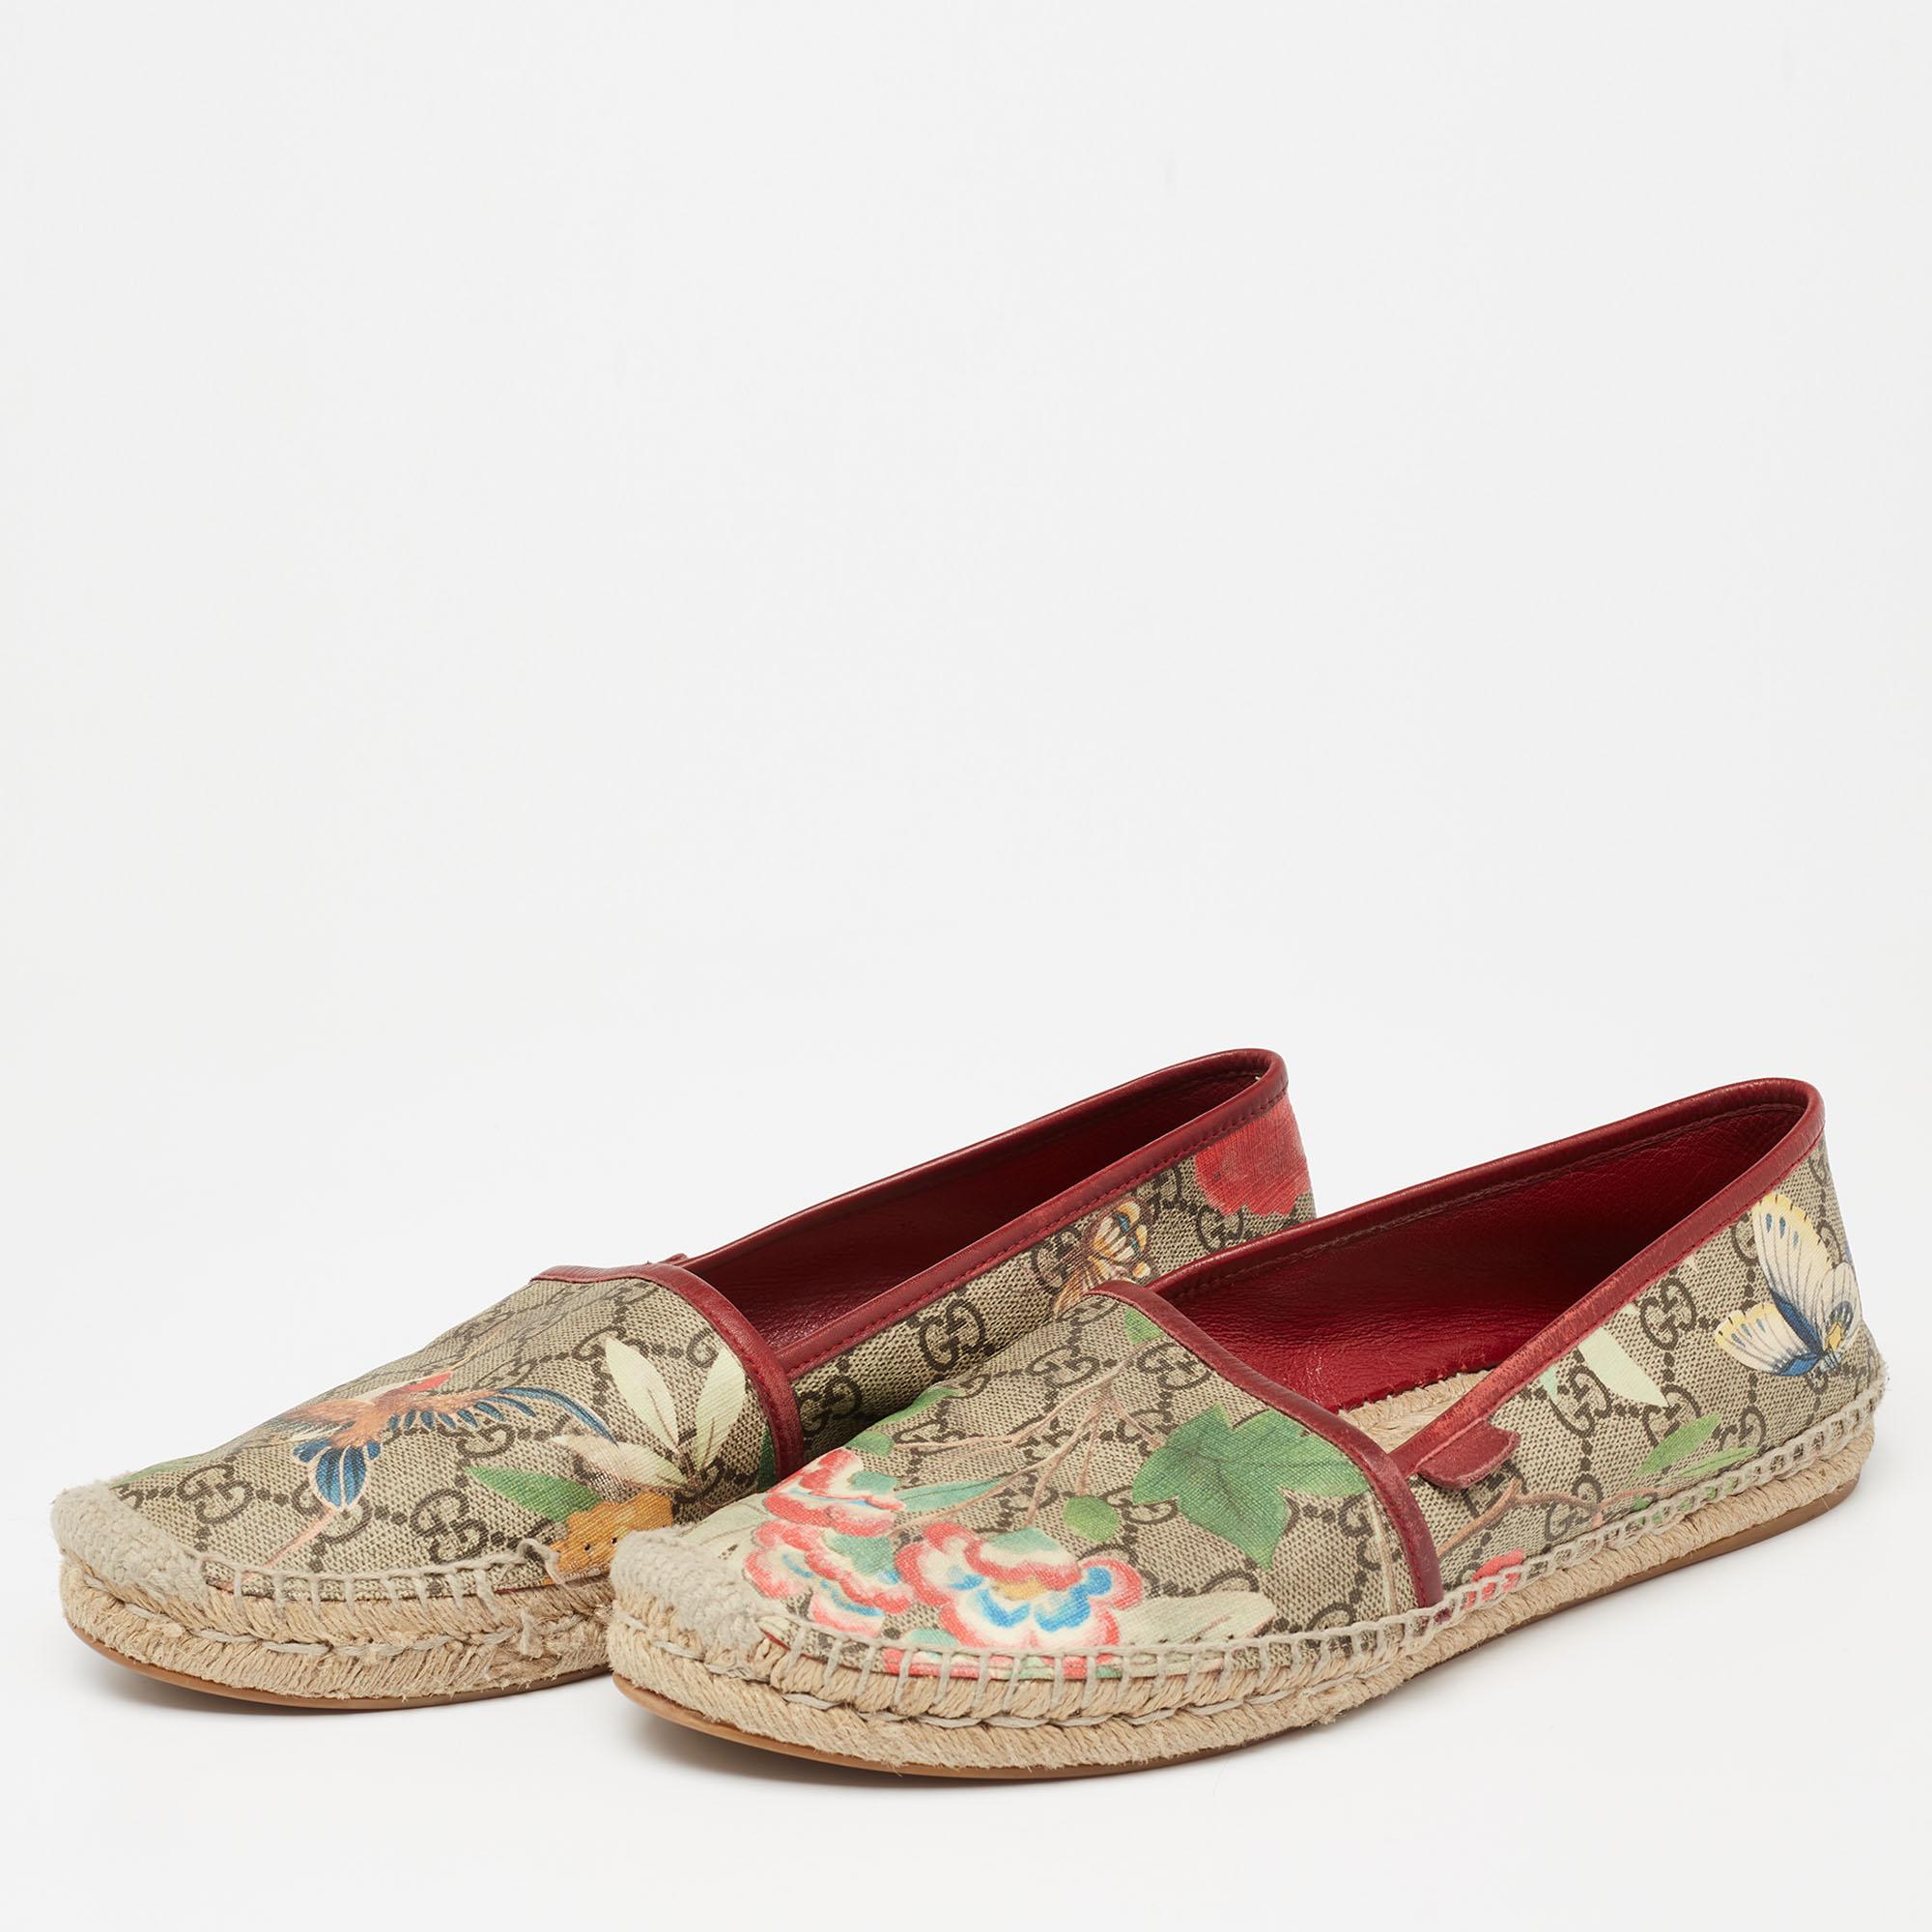 A stylish and luxurious daytime wear pair, these beautiful Gucci espadrilles are easy to slip on over casuals. Constructed in GG Supreme canvas, this pair features Tian prints along with contrast trims to complete the look.